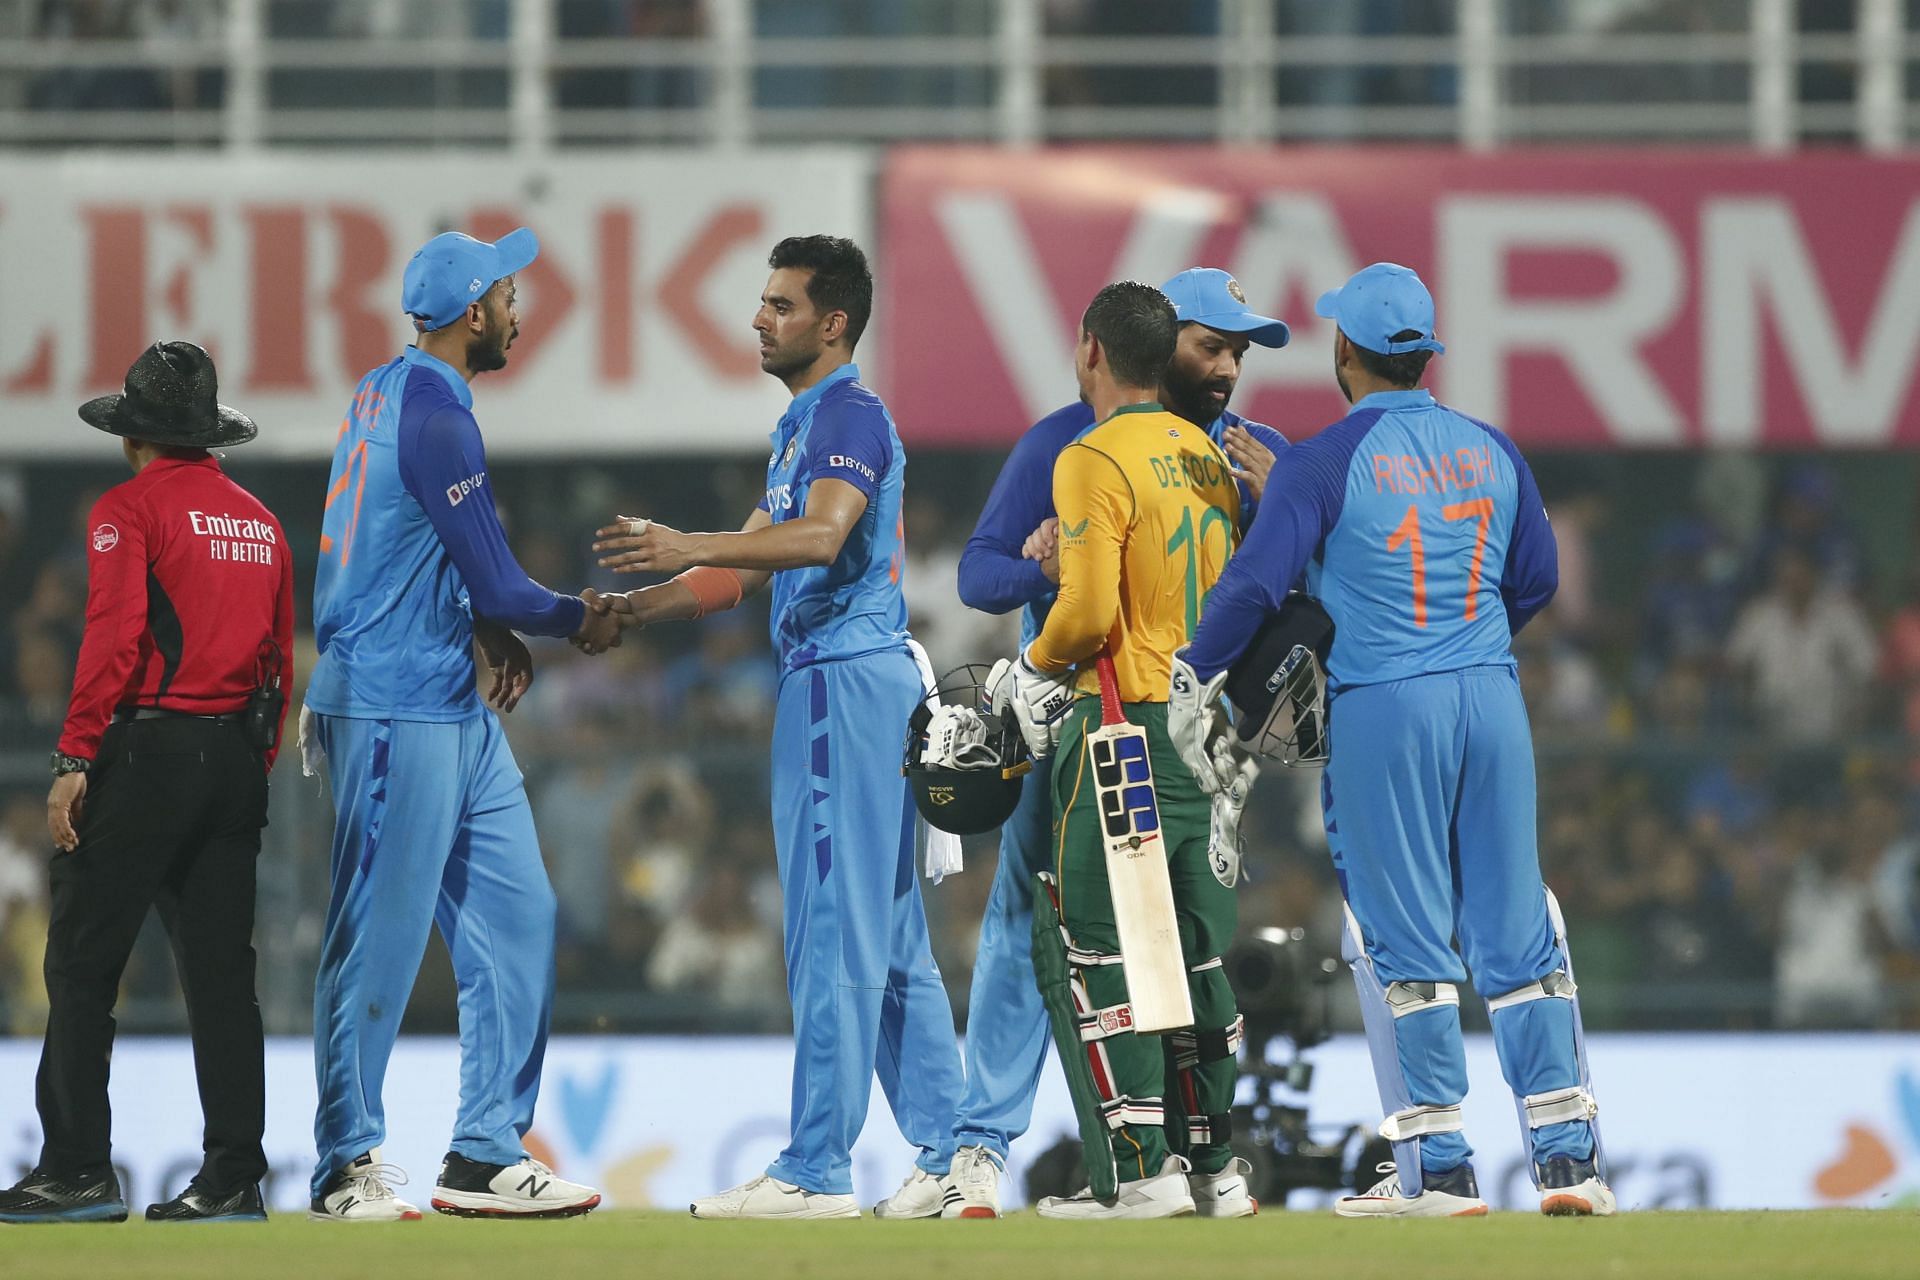 2nd T20 International: India v South Africa